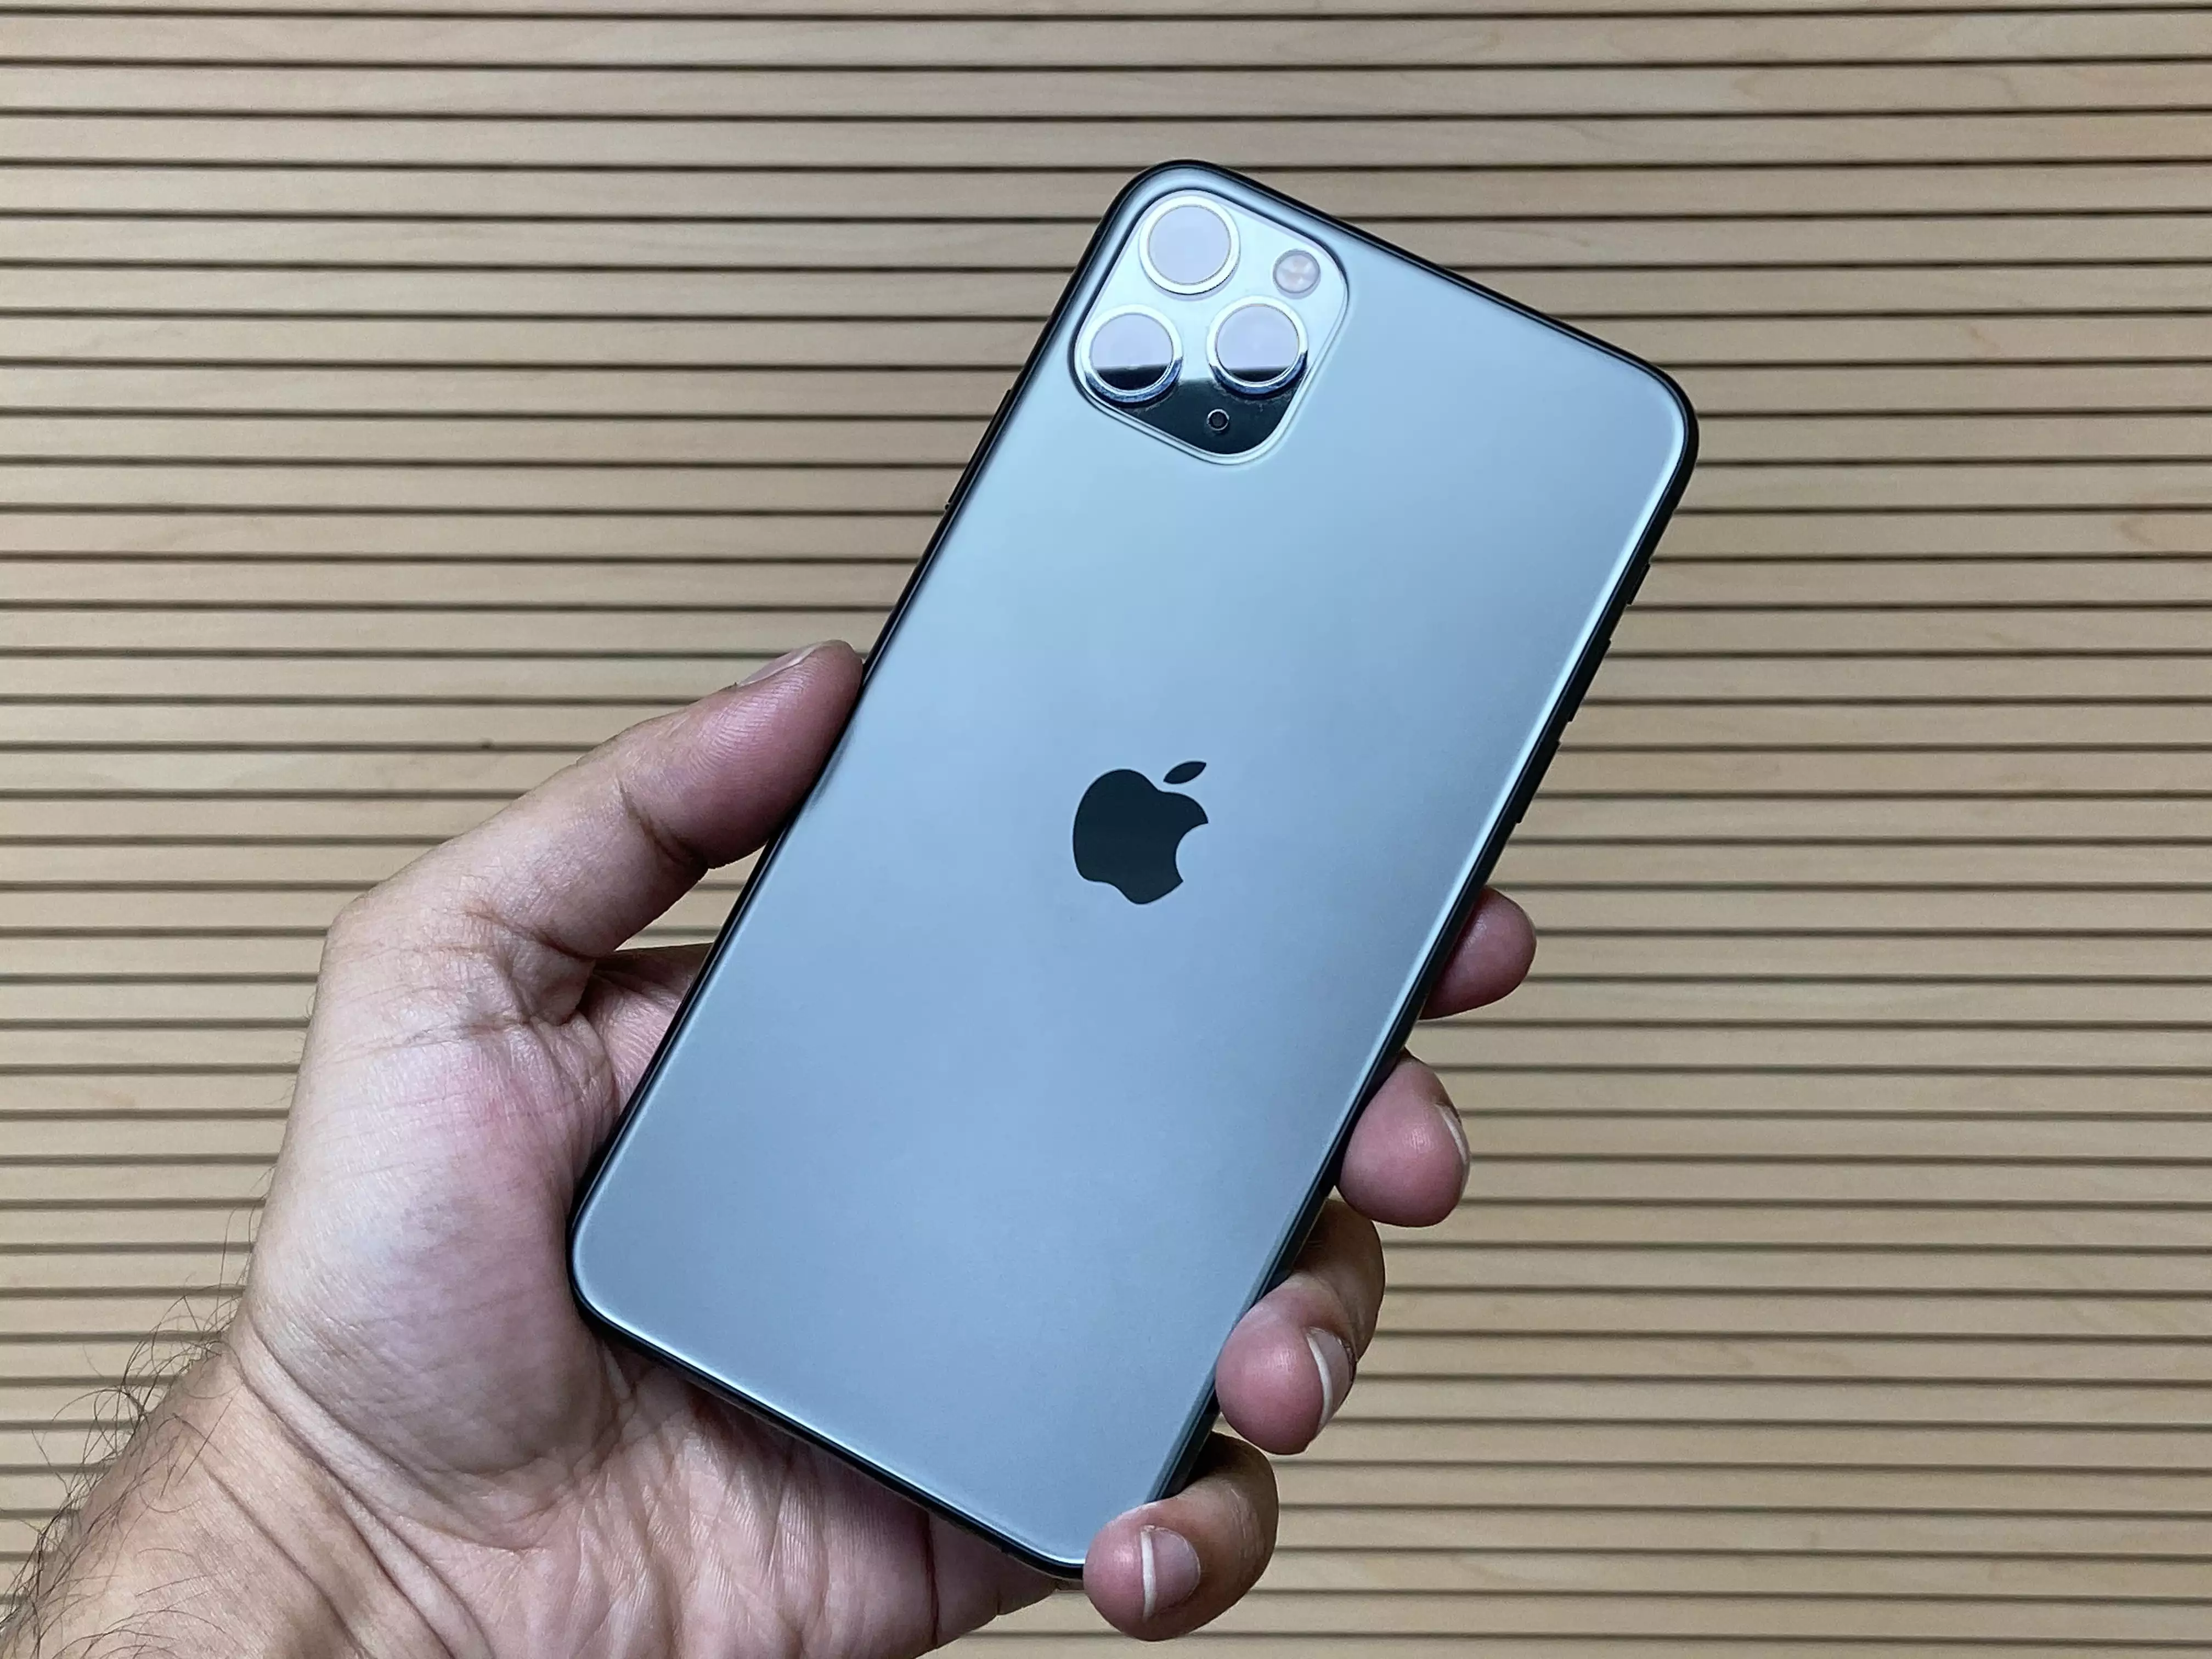 Some iPhone 11 Pro series units may be suffering from a green tint display issue